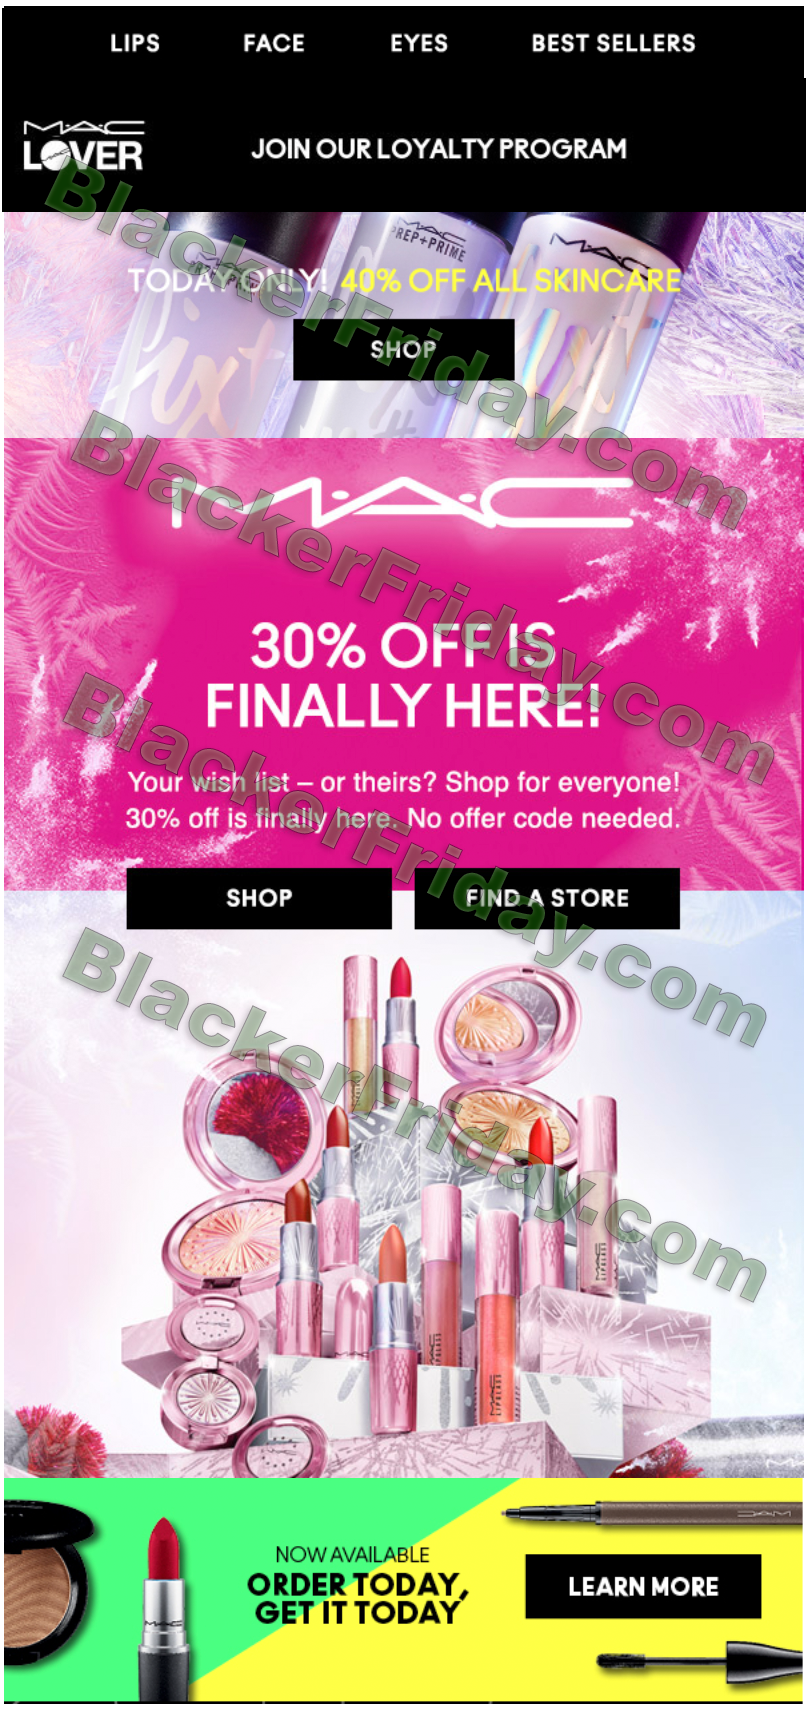 annual sales for mac cosmetics